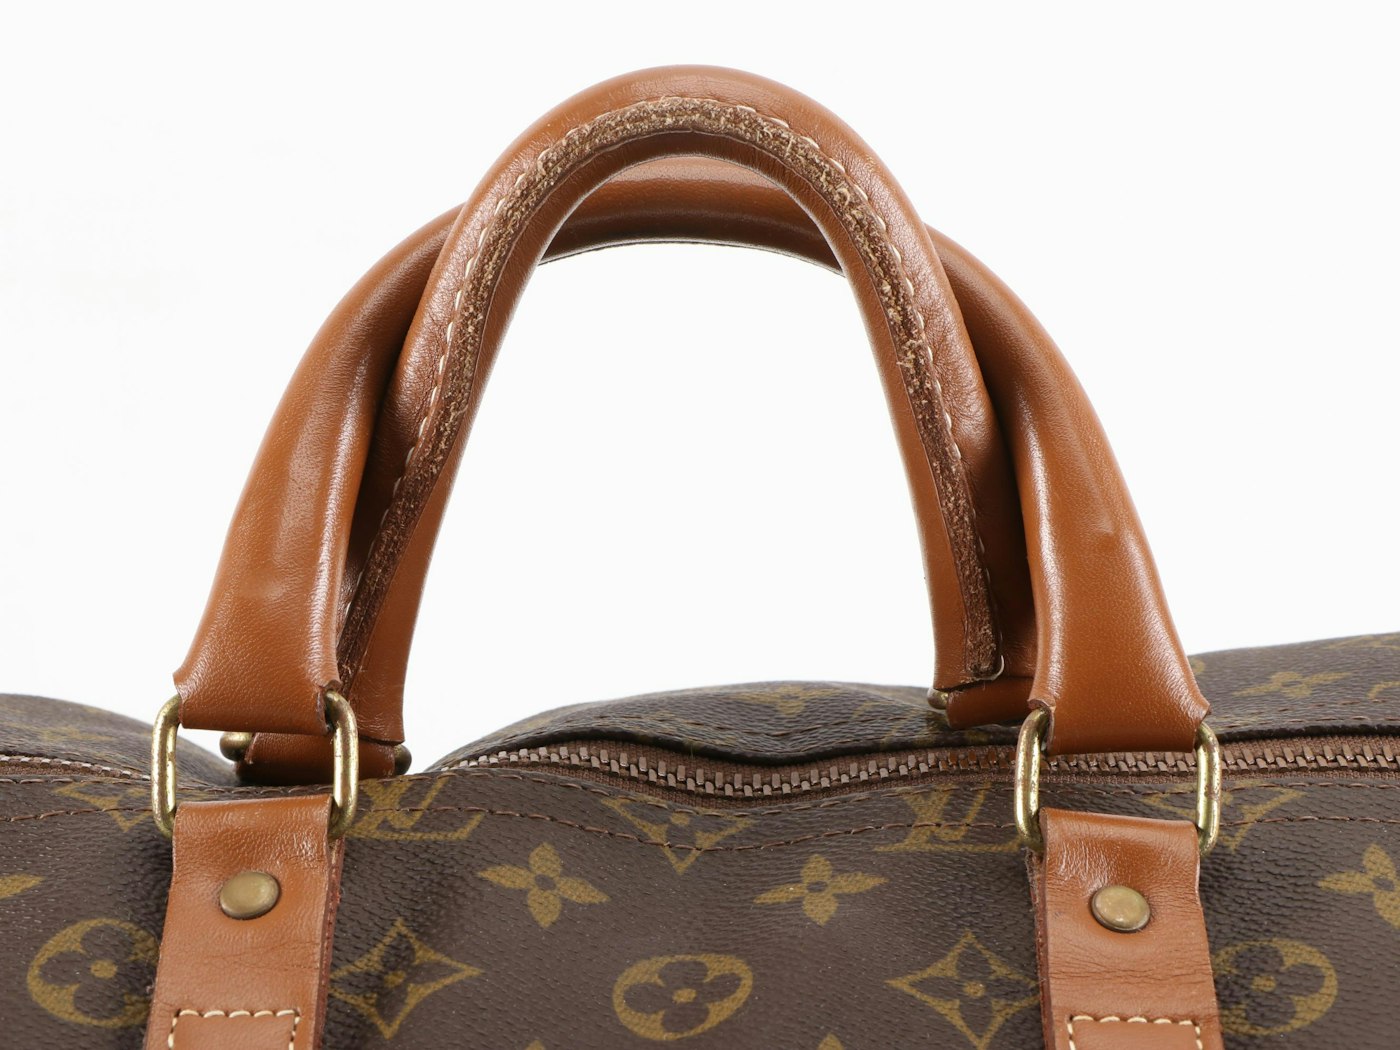 LOUIS VUITTON tote bag in brown monogram canvas and natural leather -  VALOIS VINTAGE PARIS